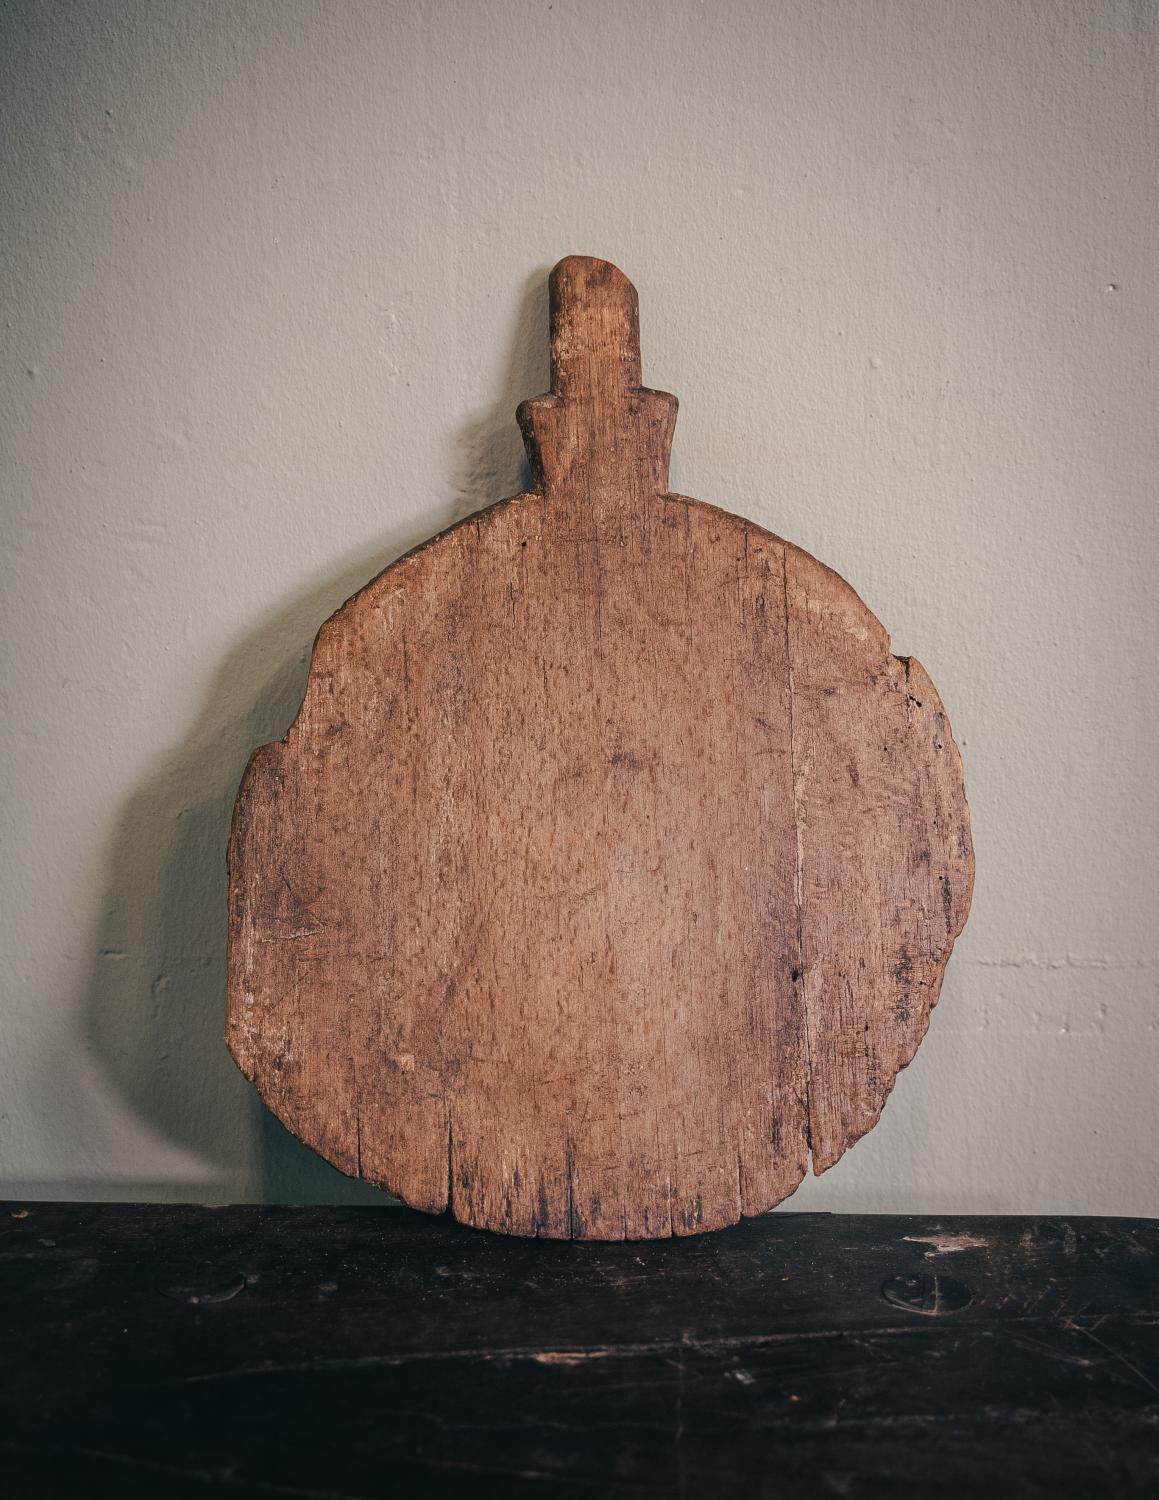 Vintage cutting board from the 1920s